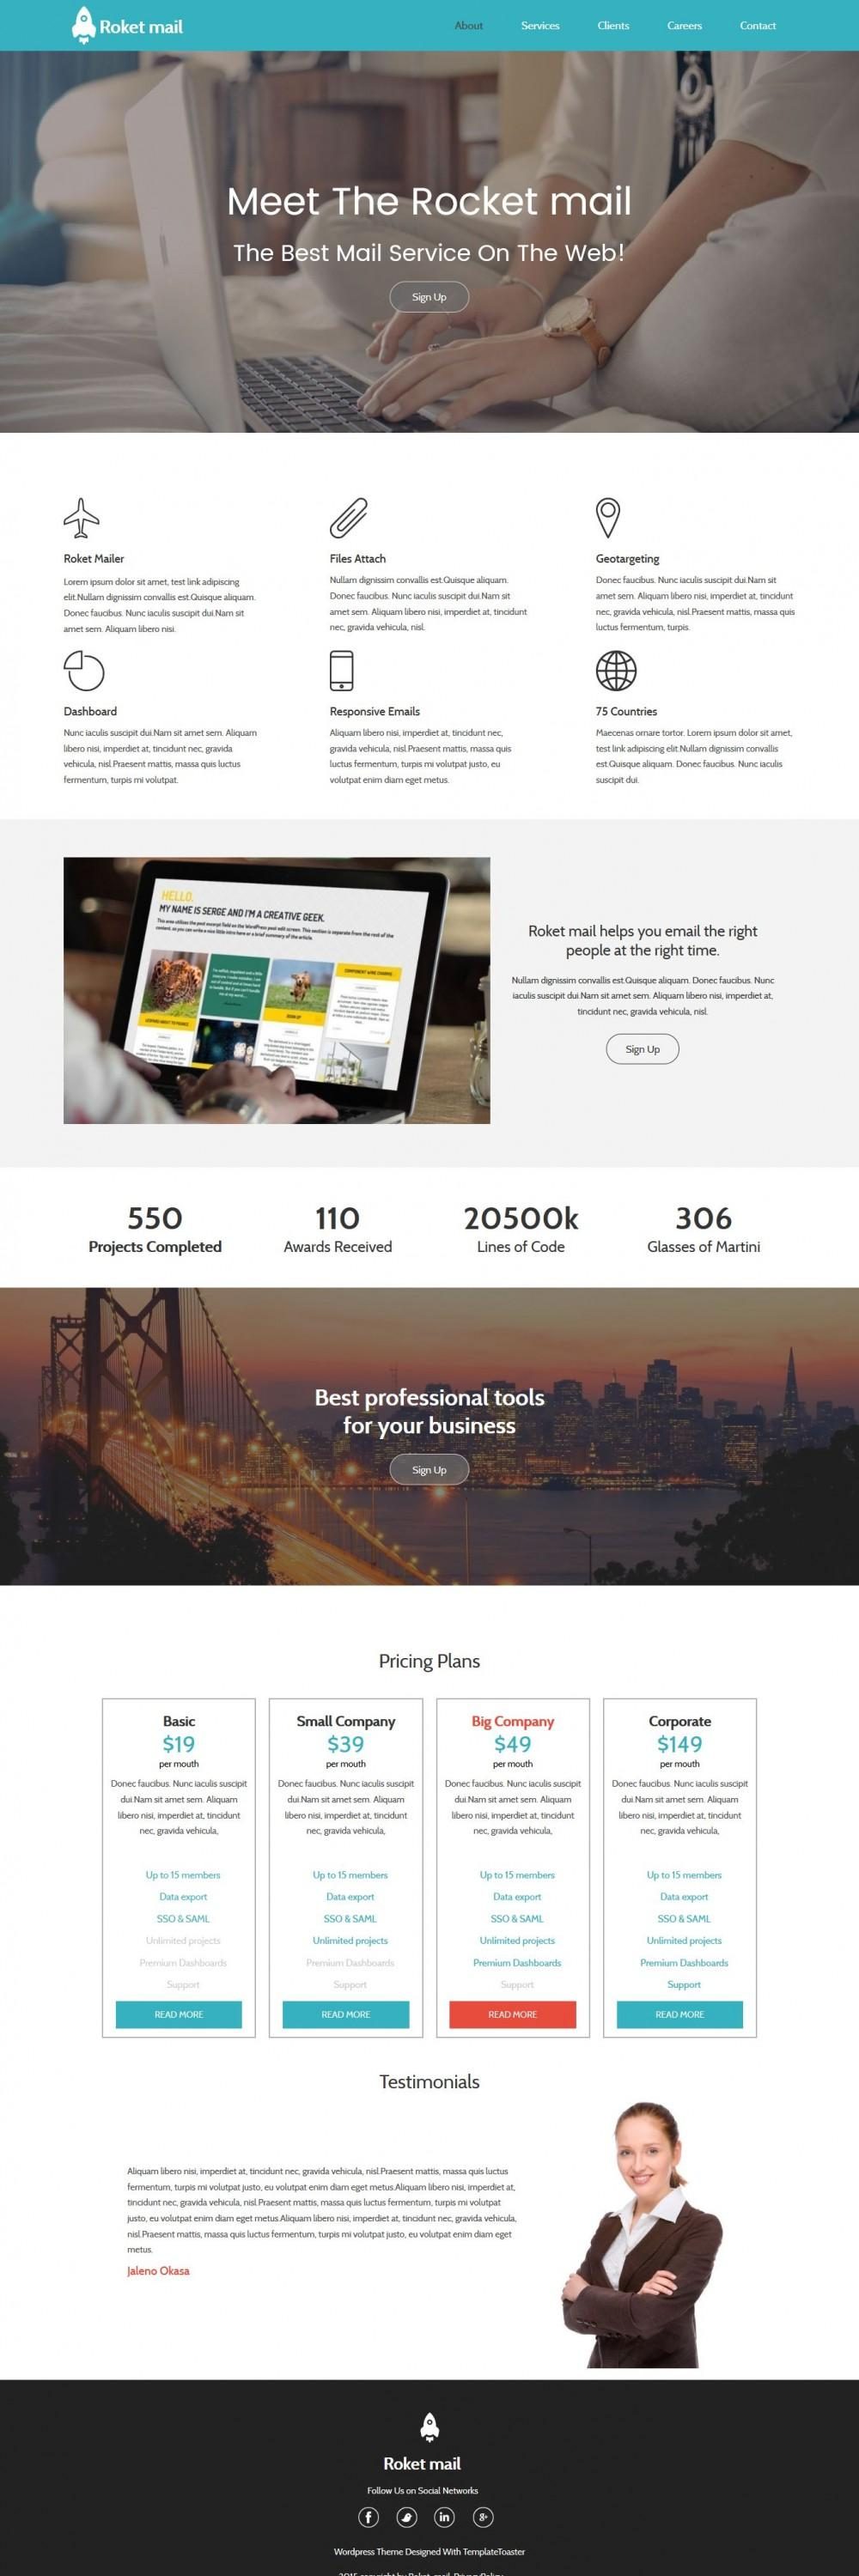 Roket Mail - Free WordPress Theme For Mail Service Agencies